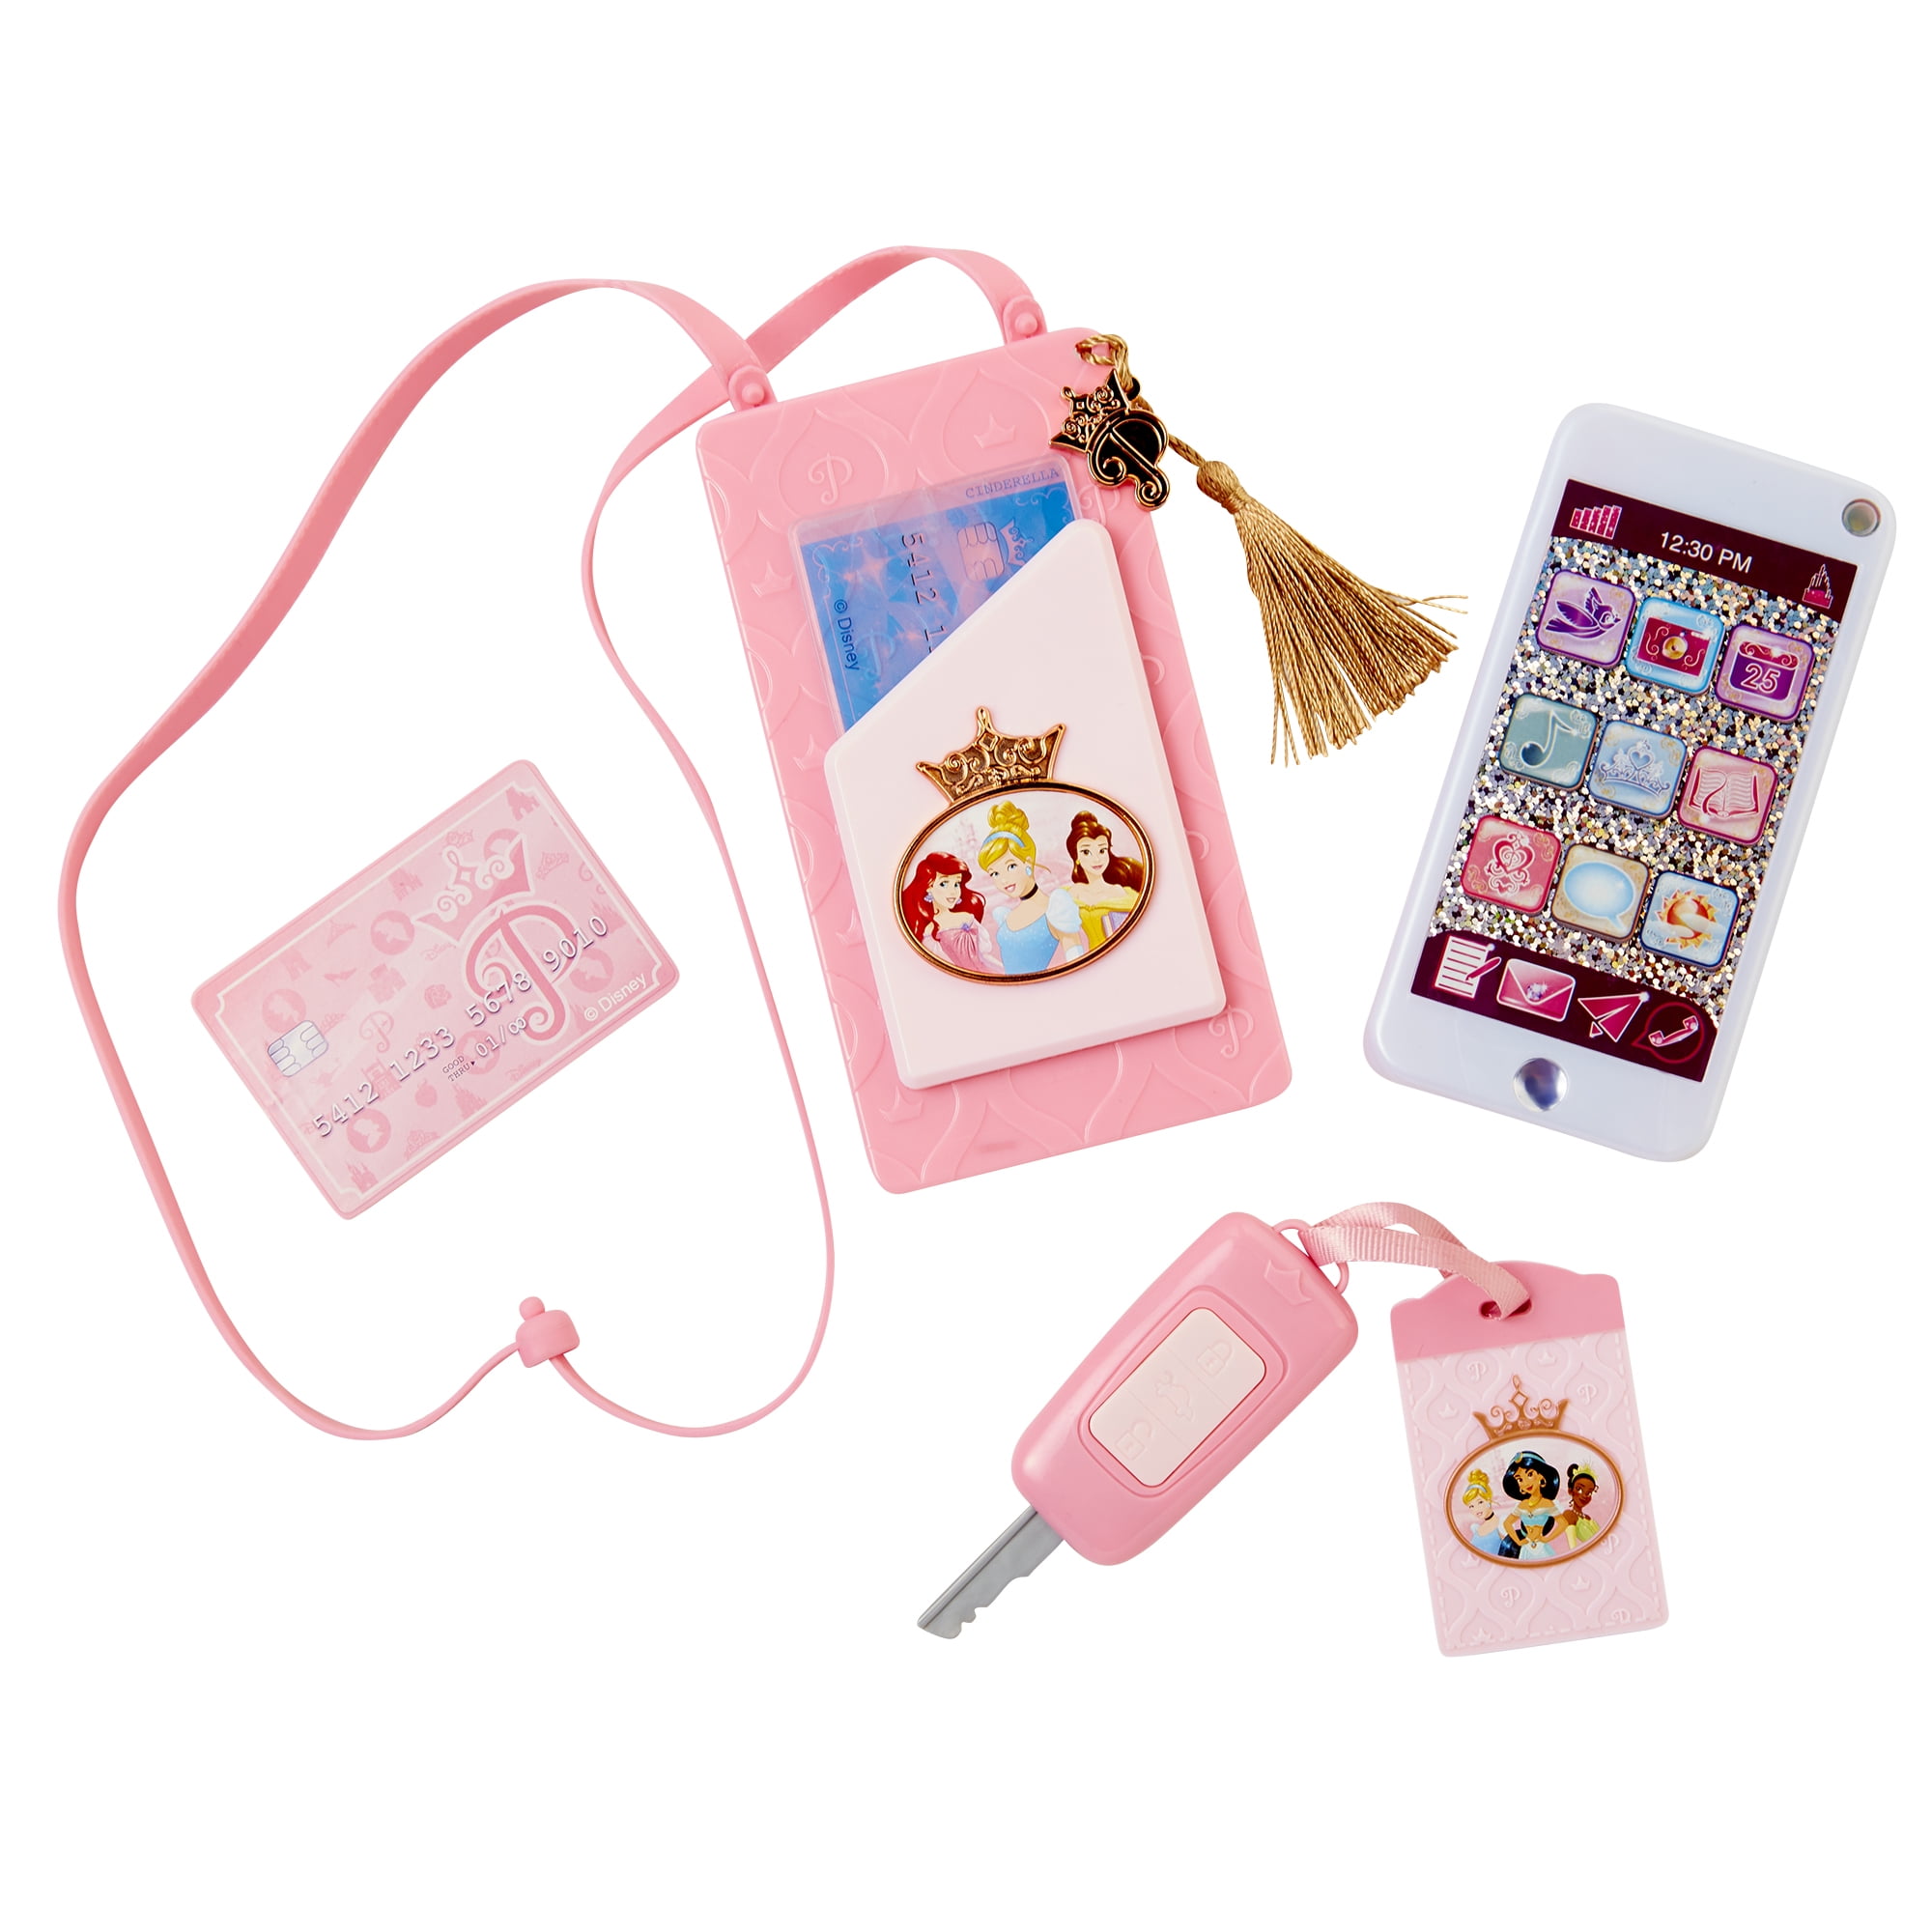 Disney Princess Style Collection OnTheGo Play Phone Set